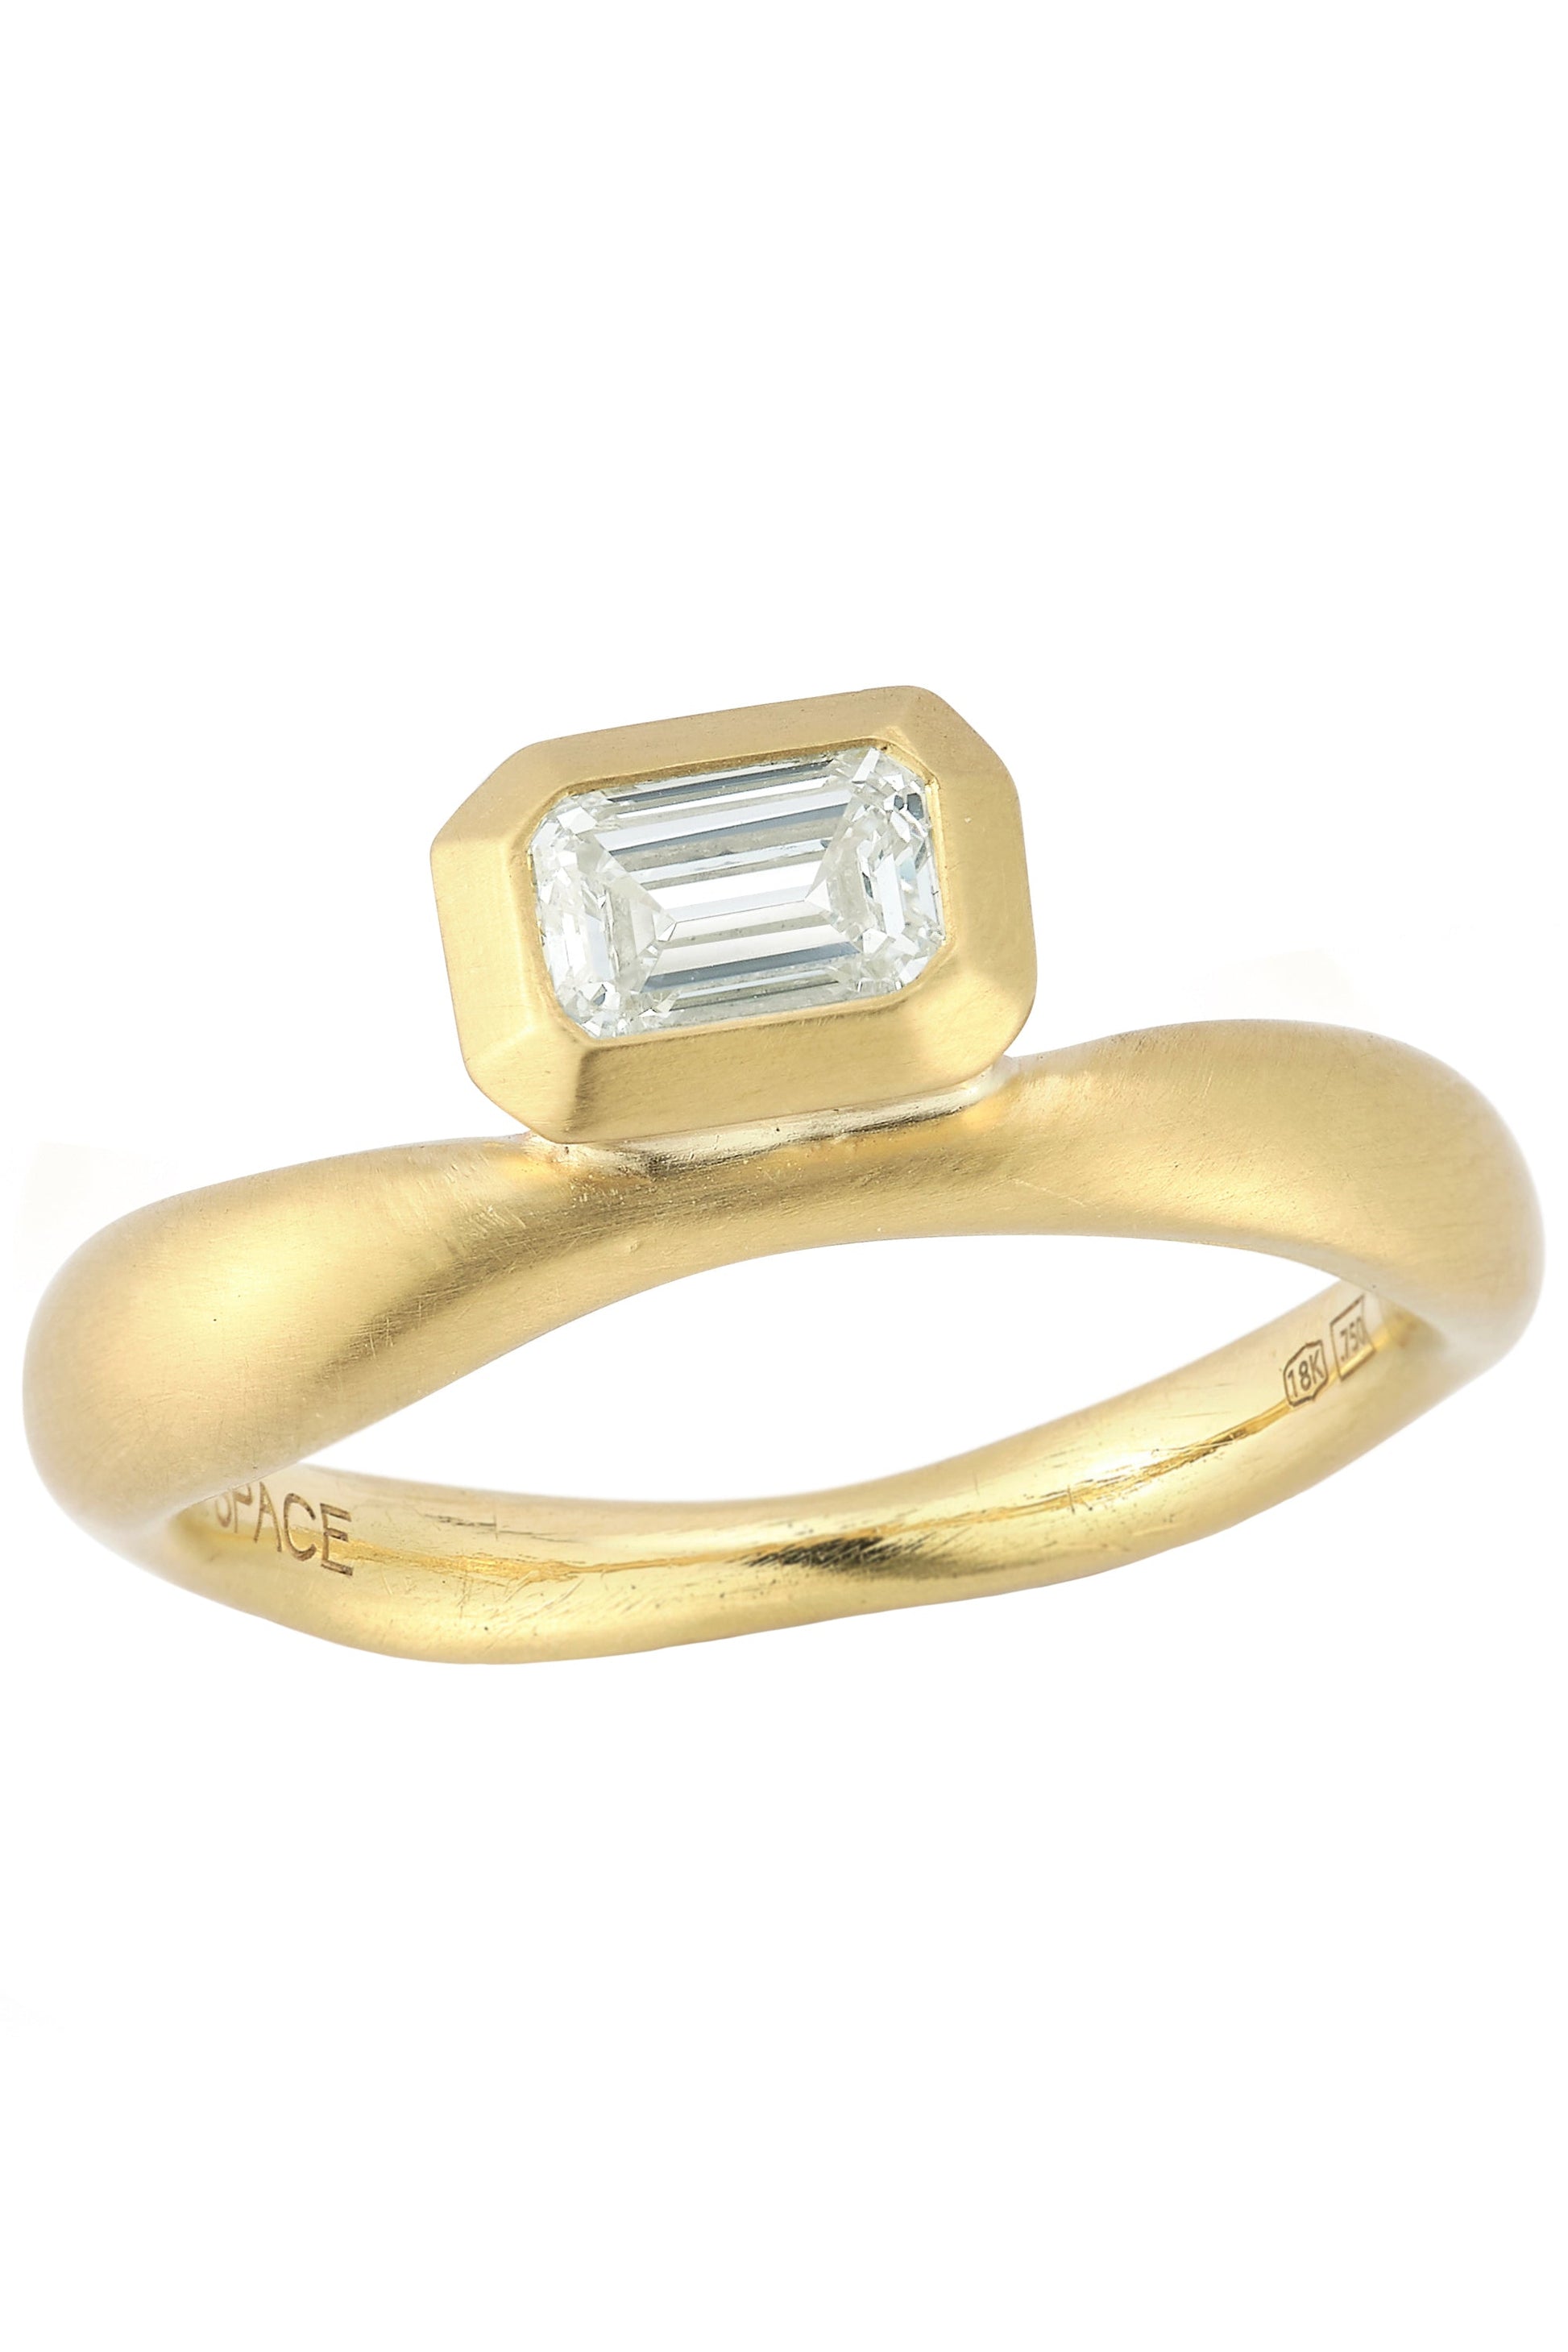 WHITE/SPACE-Touch Emerald Cut Solitaire Diamond Ring-